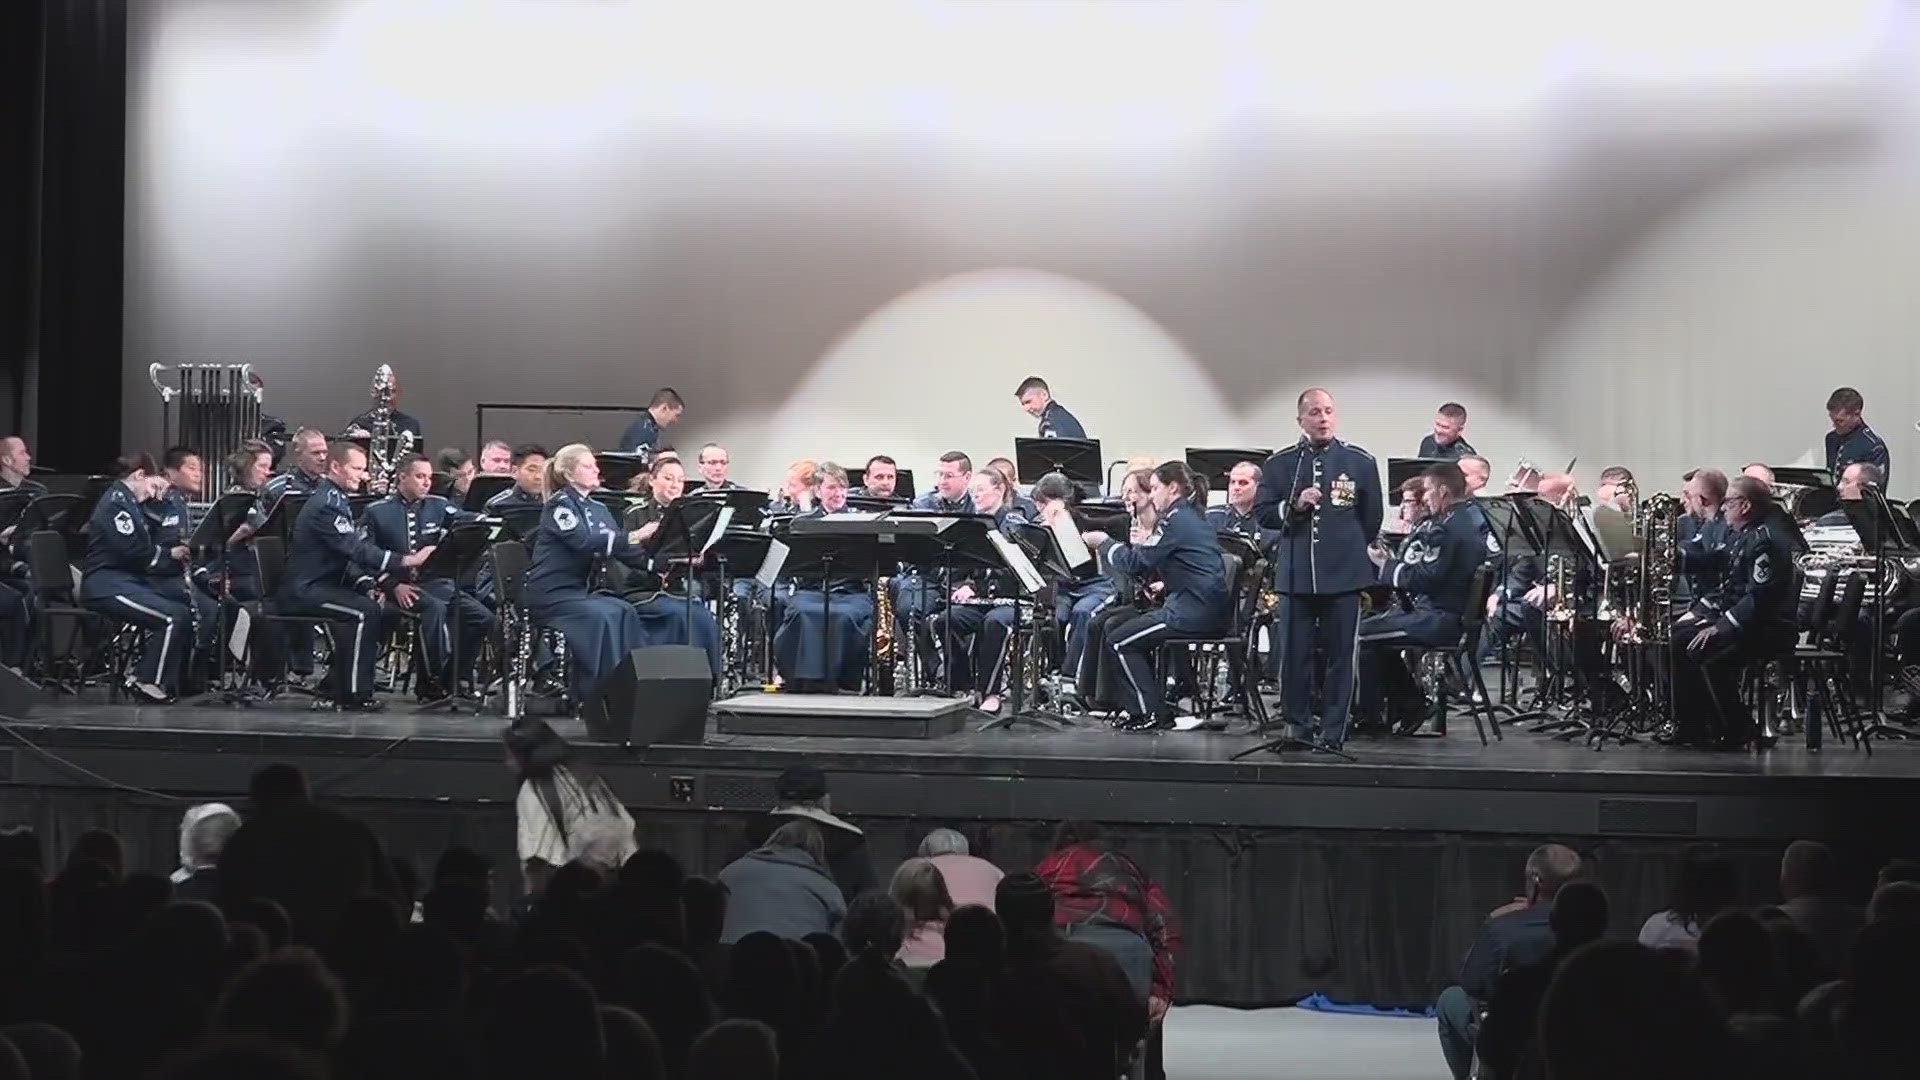 The United States Air Force Band On Tour! made four stops in Maine: Biddeford, Augusta, Farmington, and Bangor, from Friday through Monday.